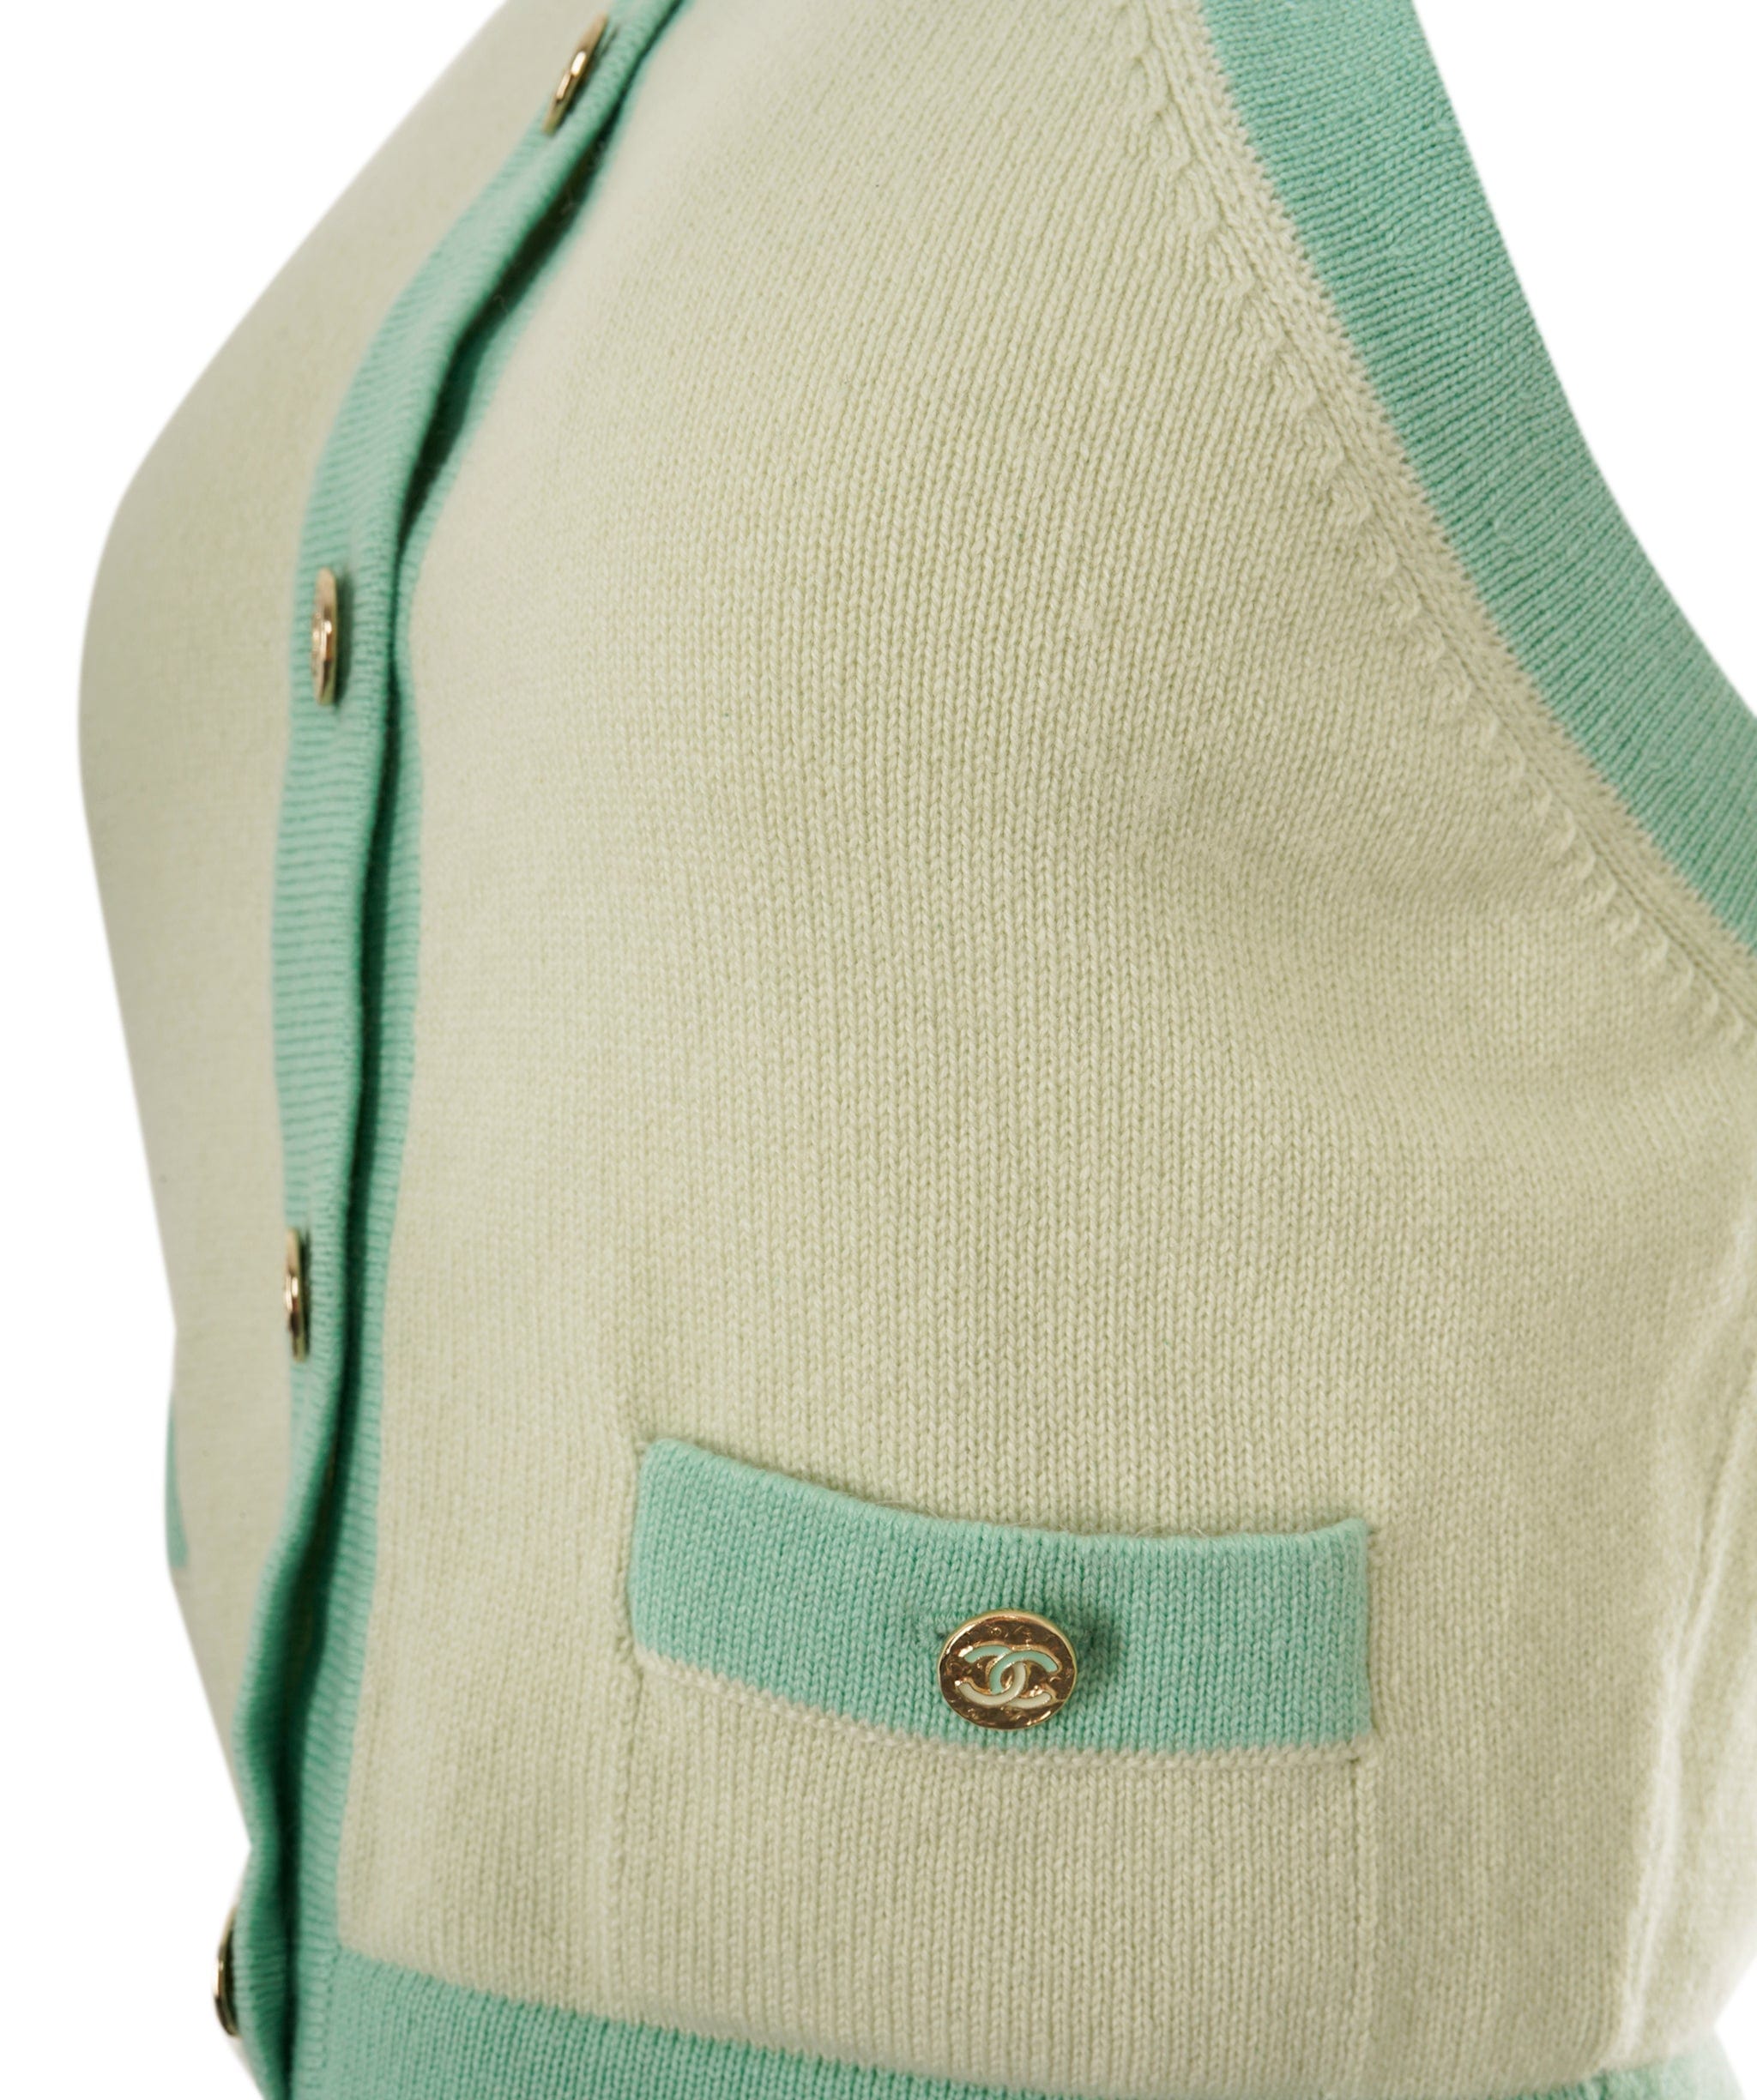 Chanel chanel knit top mint green + 2 sleeve gloves FR36 ASL8439